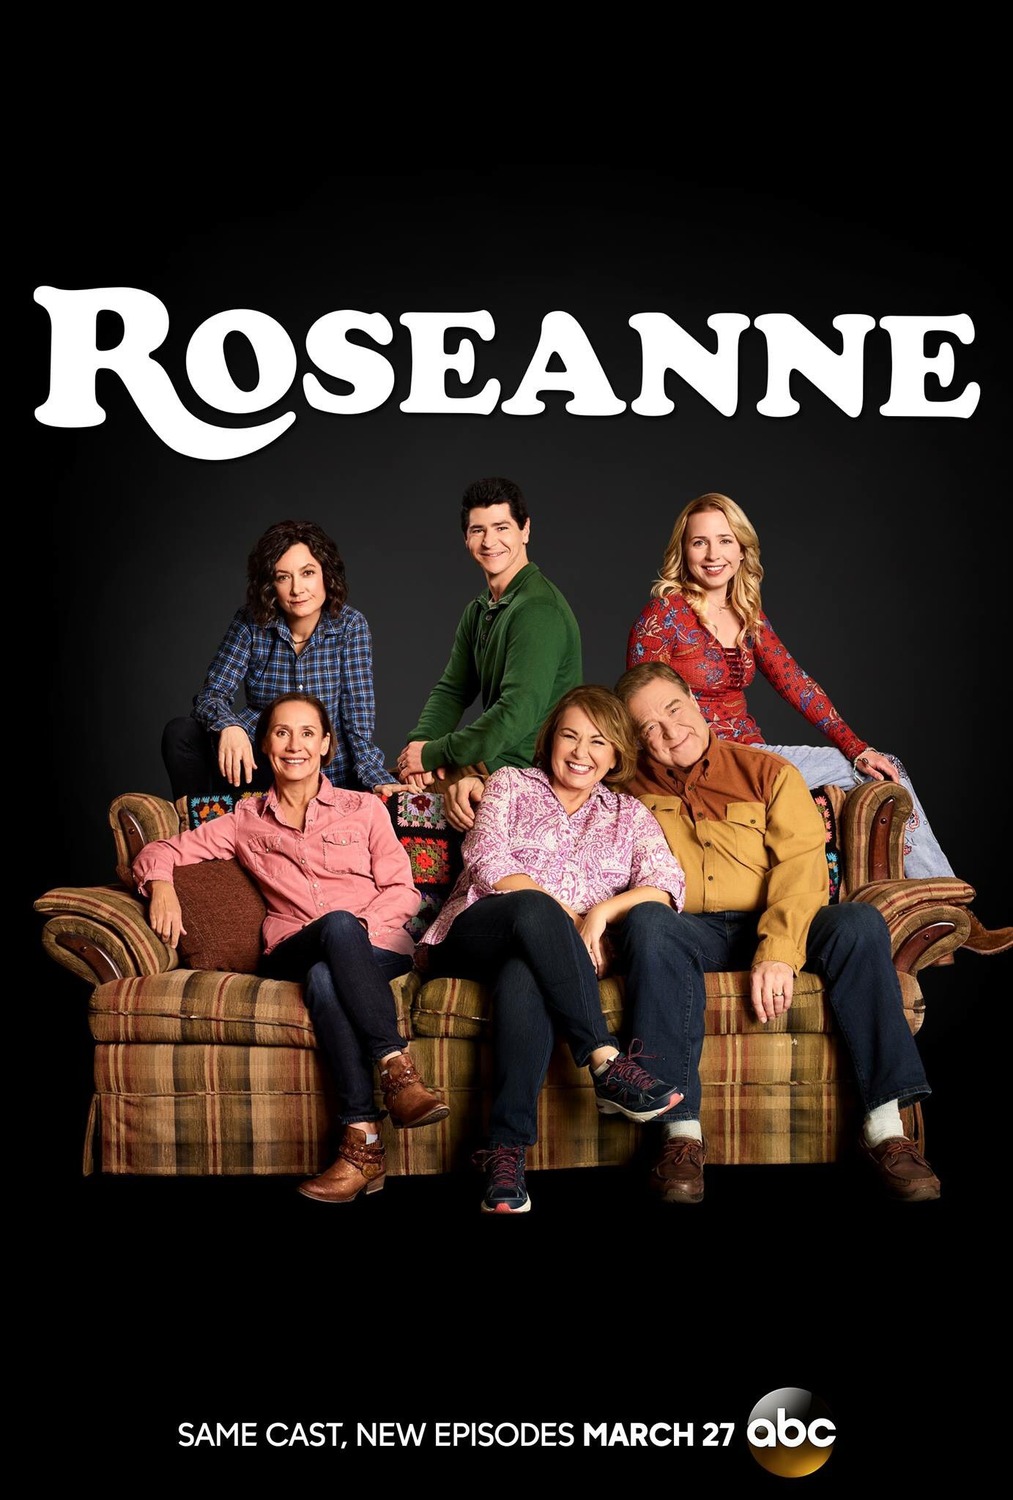 Extra Large TV Poster Image for Roseanne (#2 of 2)